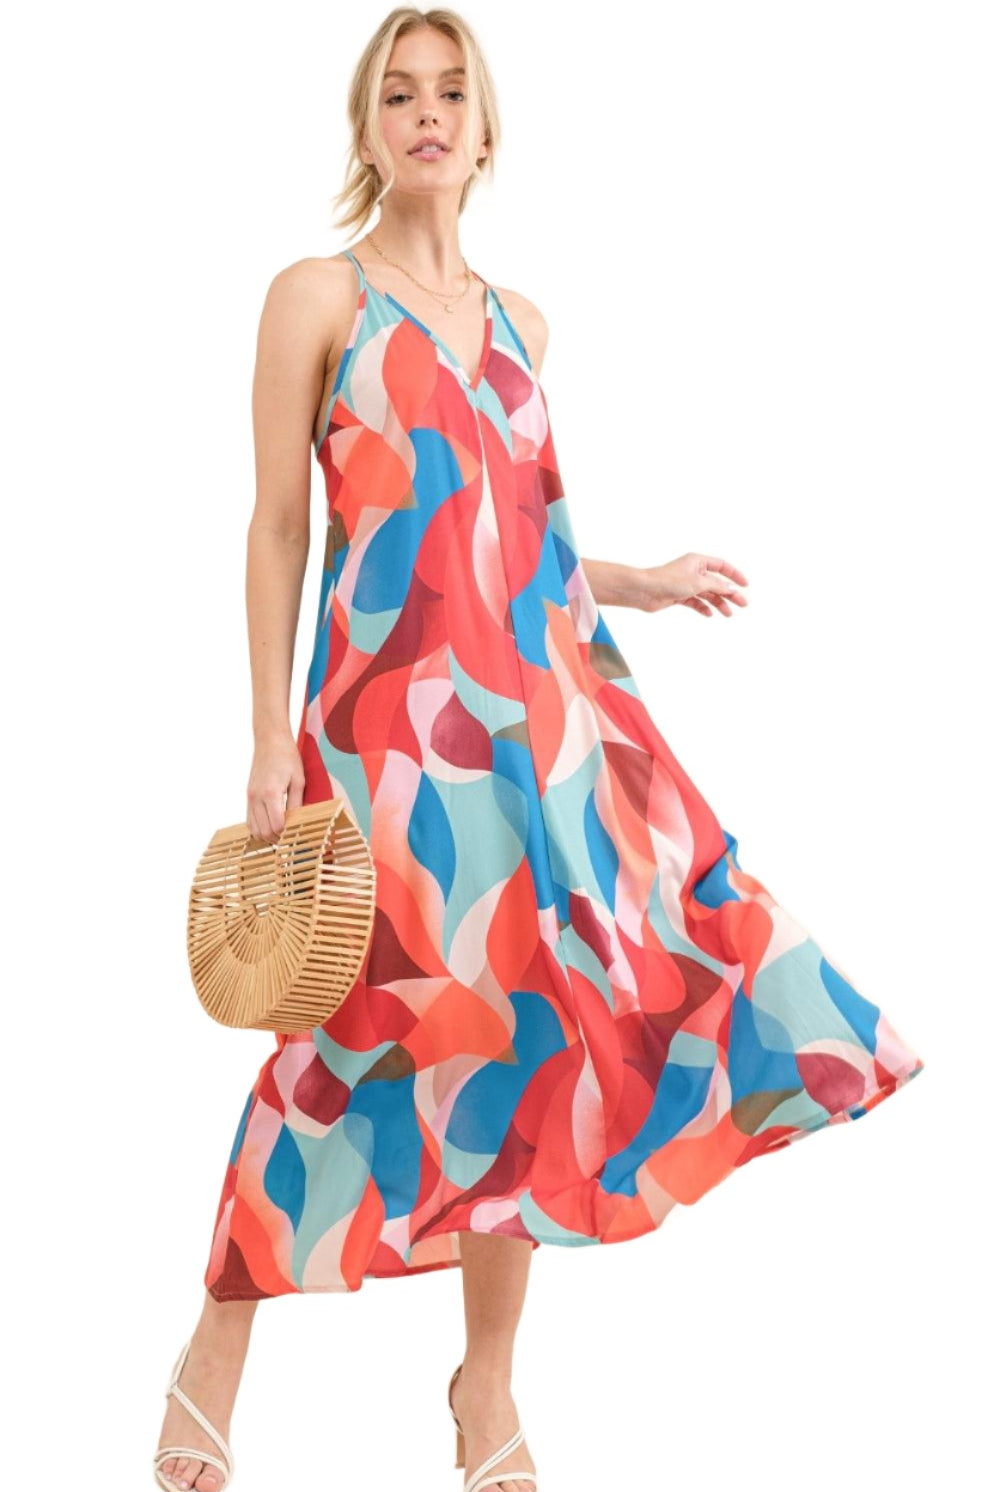 Women's Dresses And the Why Printed Crisscross Back Cami Dress